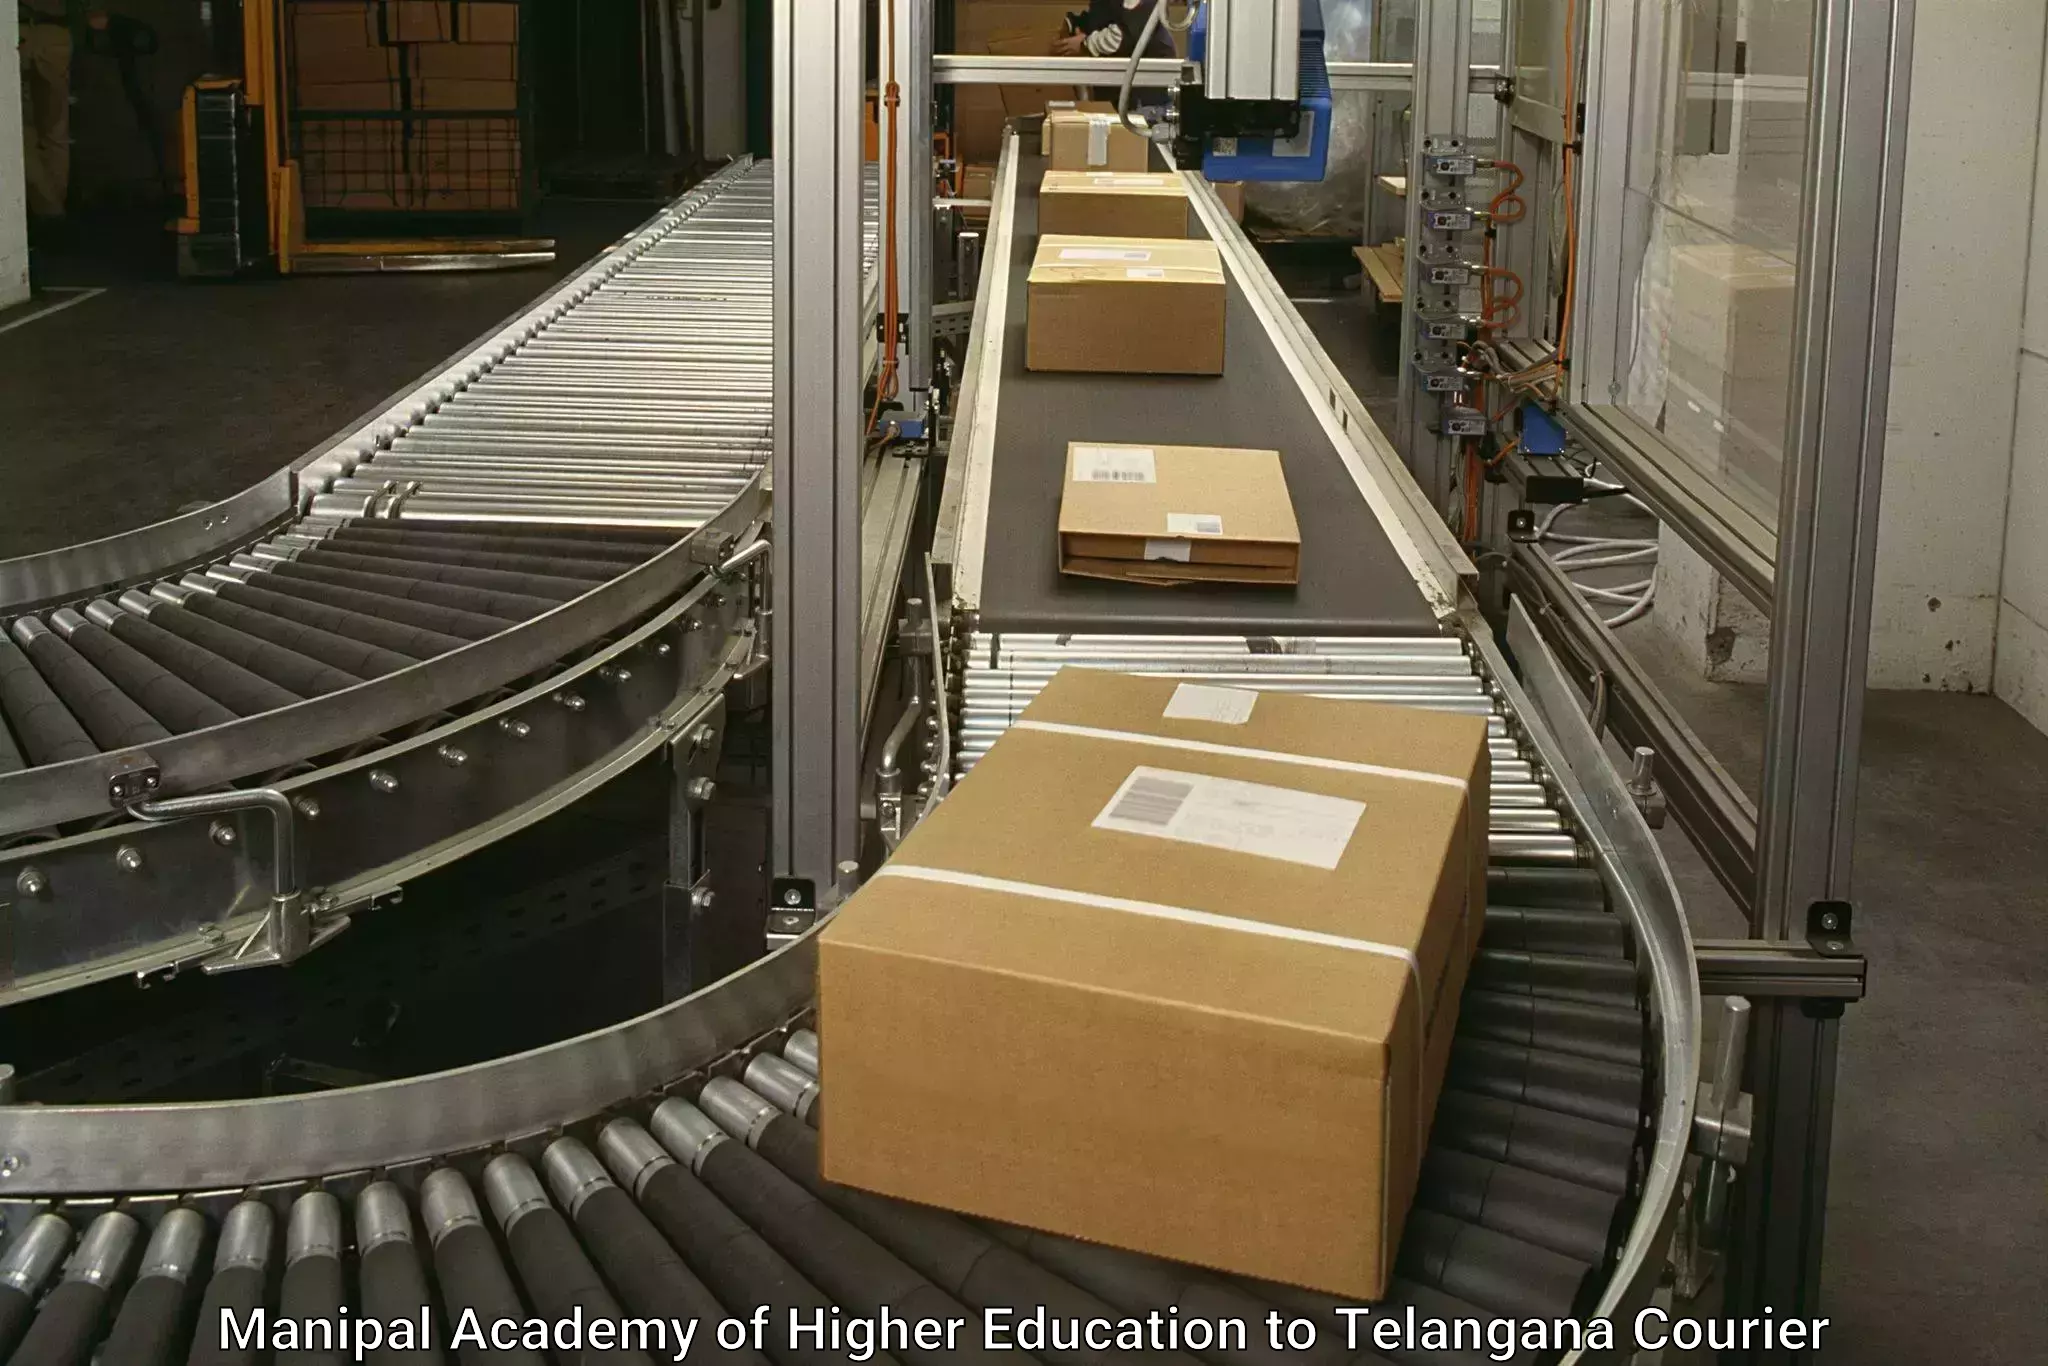 Nationwide shipping coverage Manipal Academy of Higher Education to Telangana